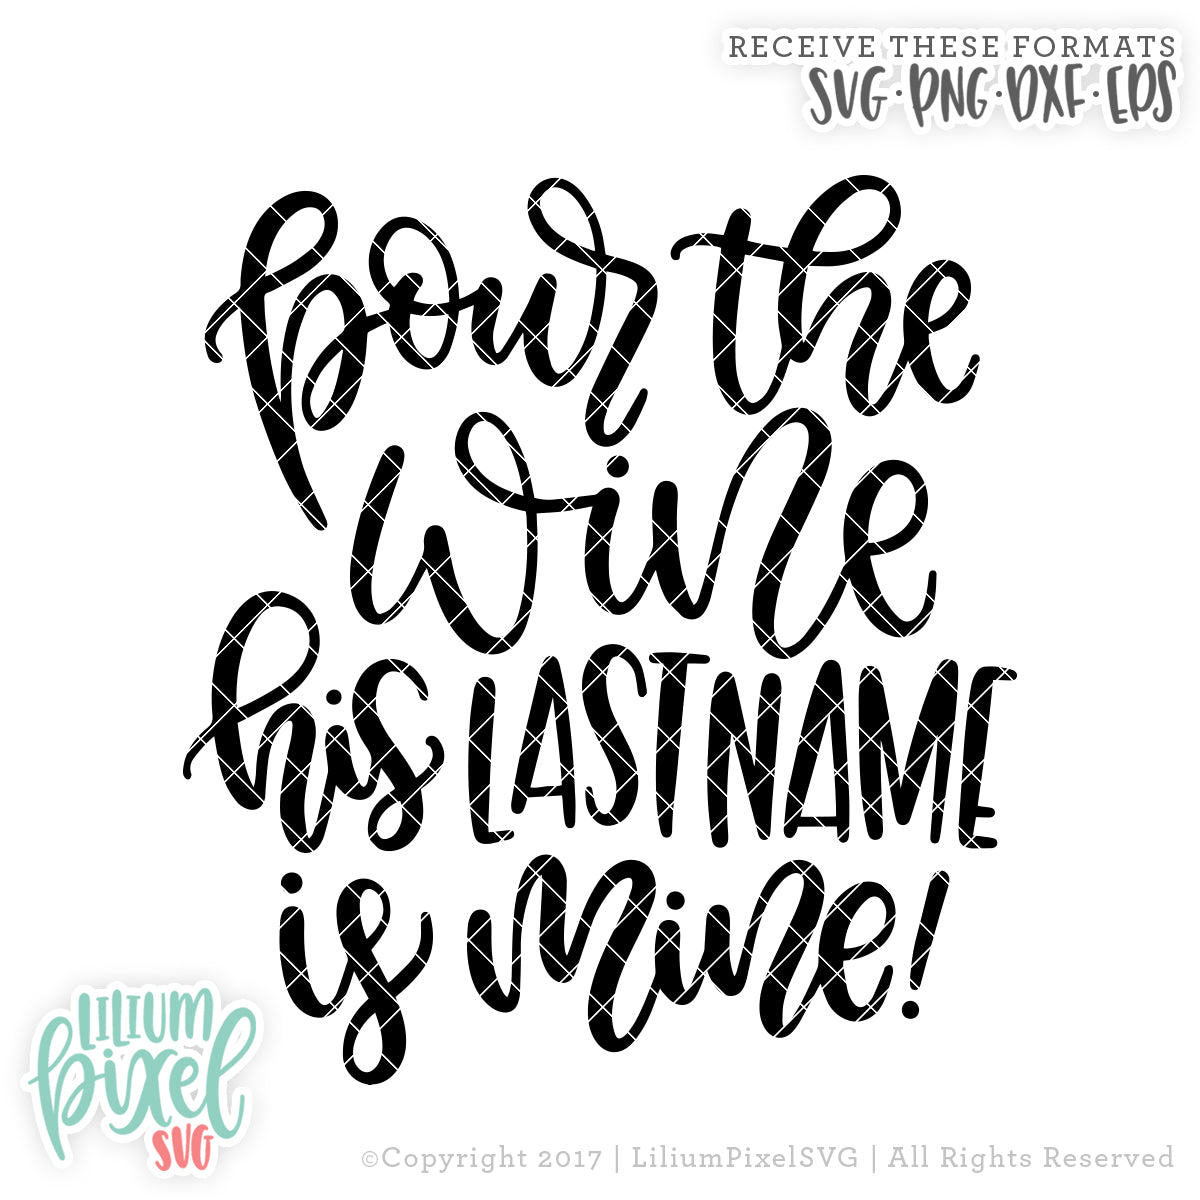 Pour the Wine His Last Name is Mine - SVG PNG DXF EPS Cut File • Silhouette • Cricut • More